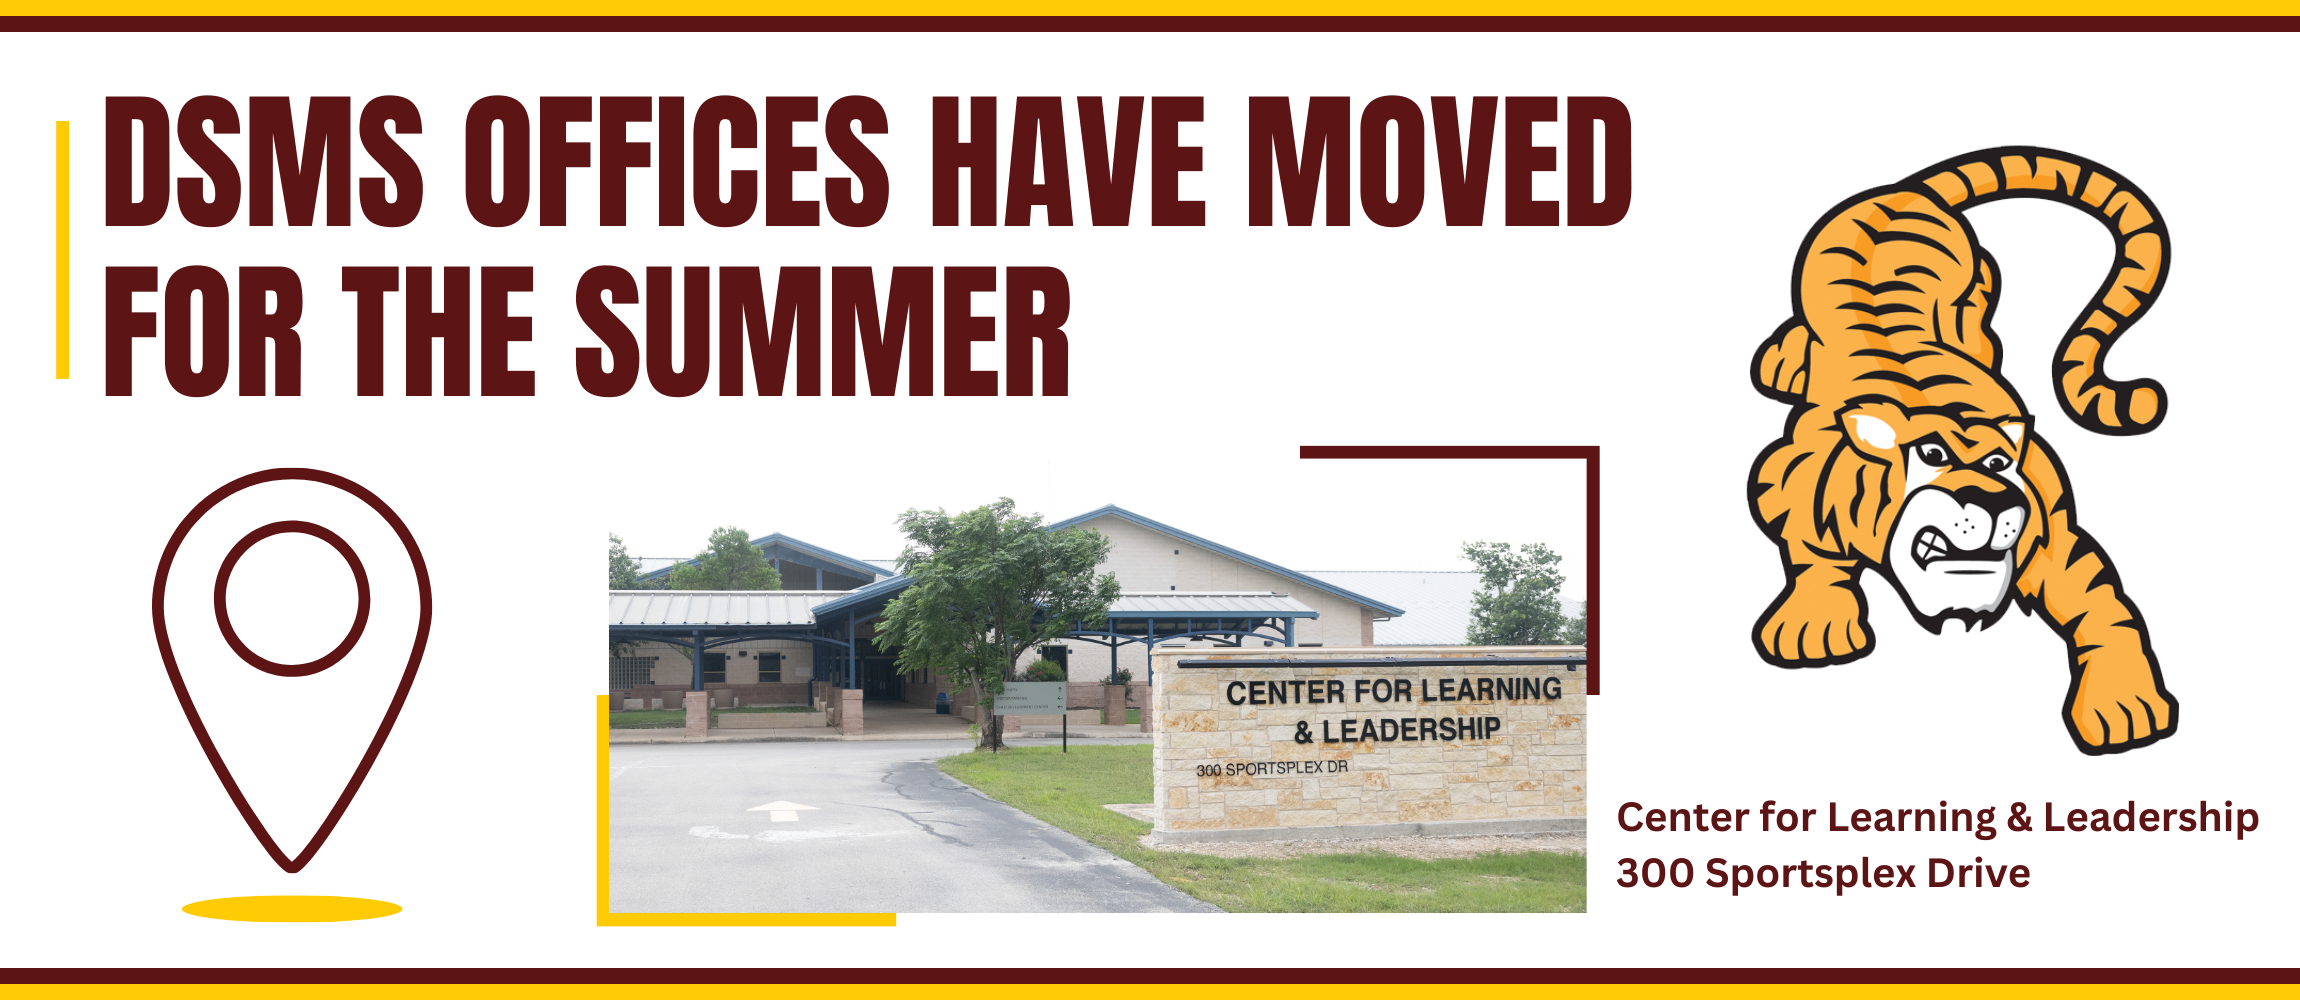 DSMSD offices have moved to the Center for Learning & Leadership for the summer.